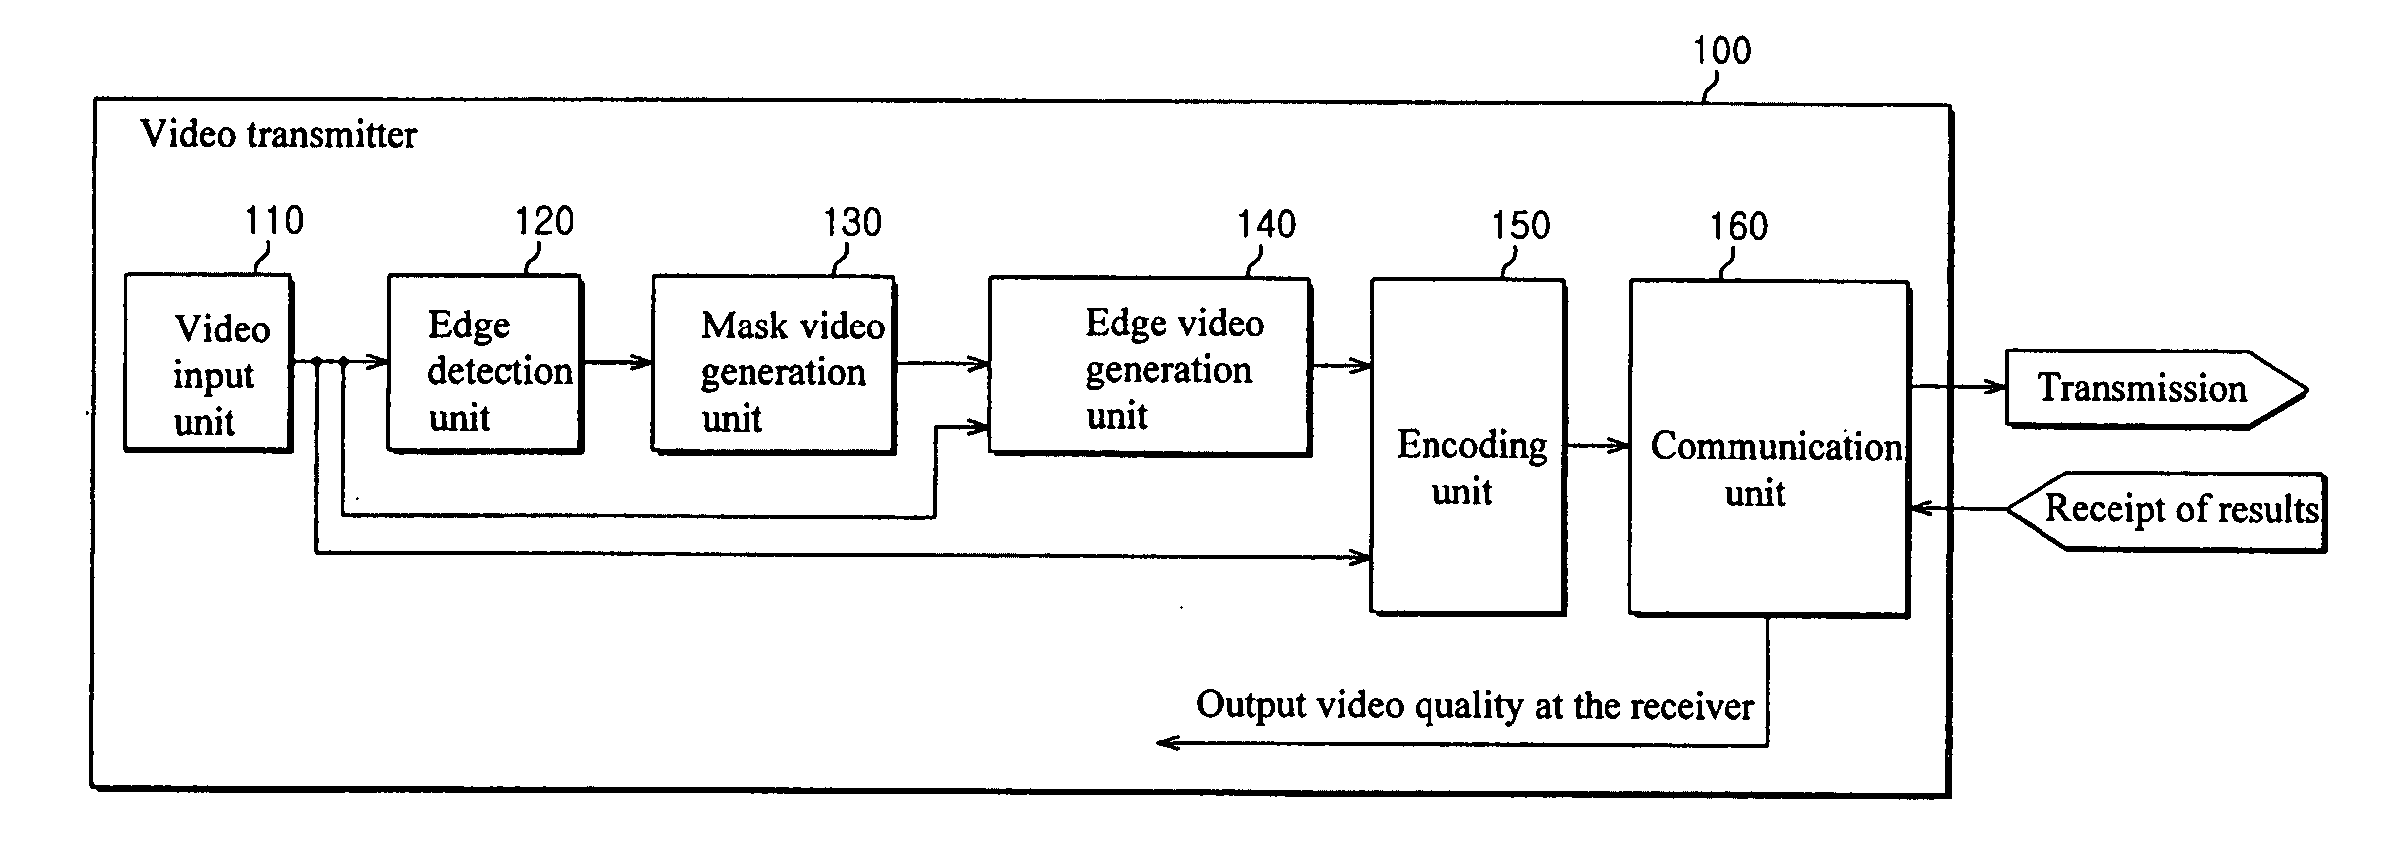 Systems and methods for objective video quality measurements